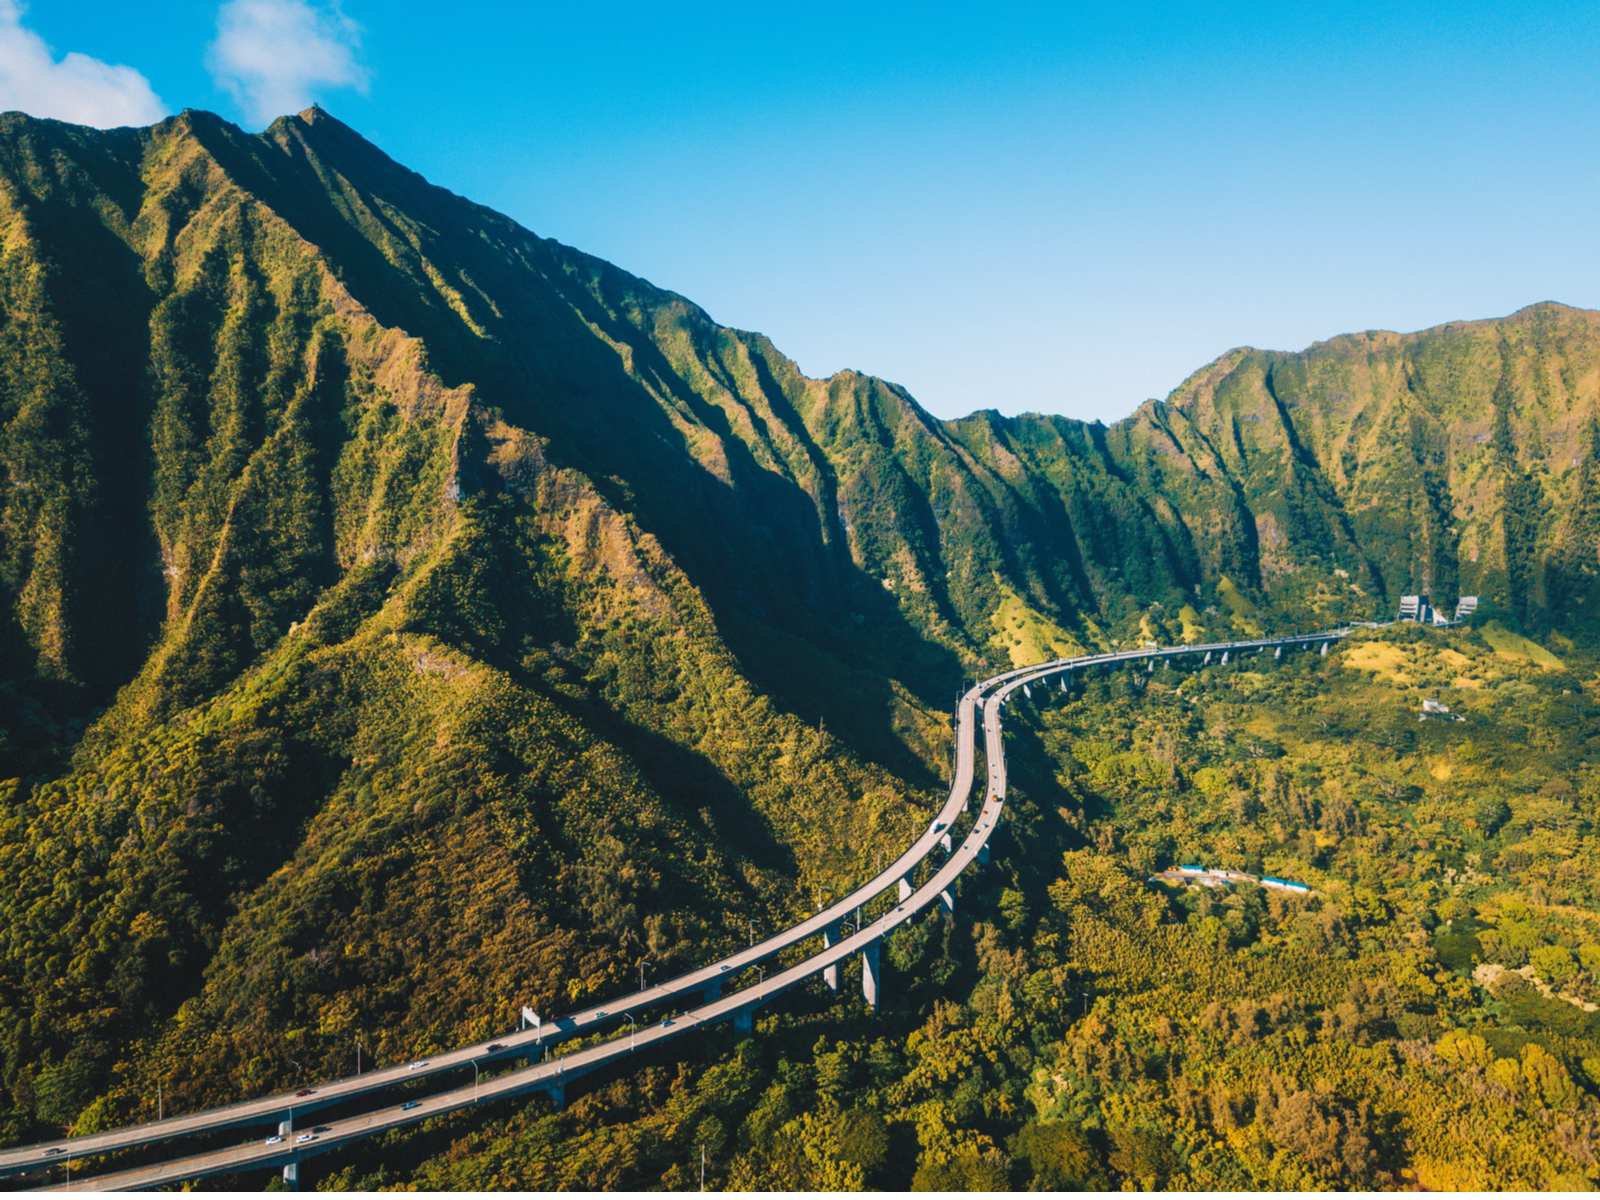 Cool aerial view of Oahu by the Haiku stairs for a piece titled Where to Stay on Oahu